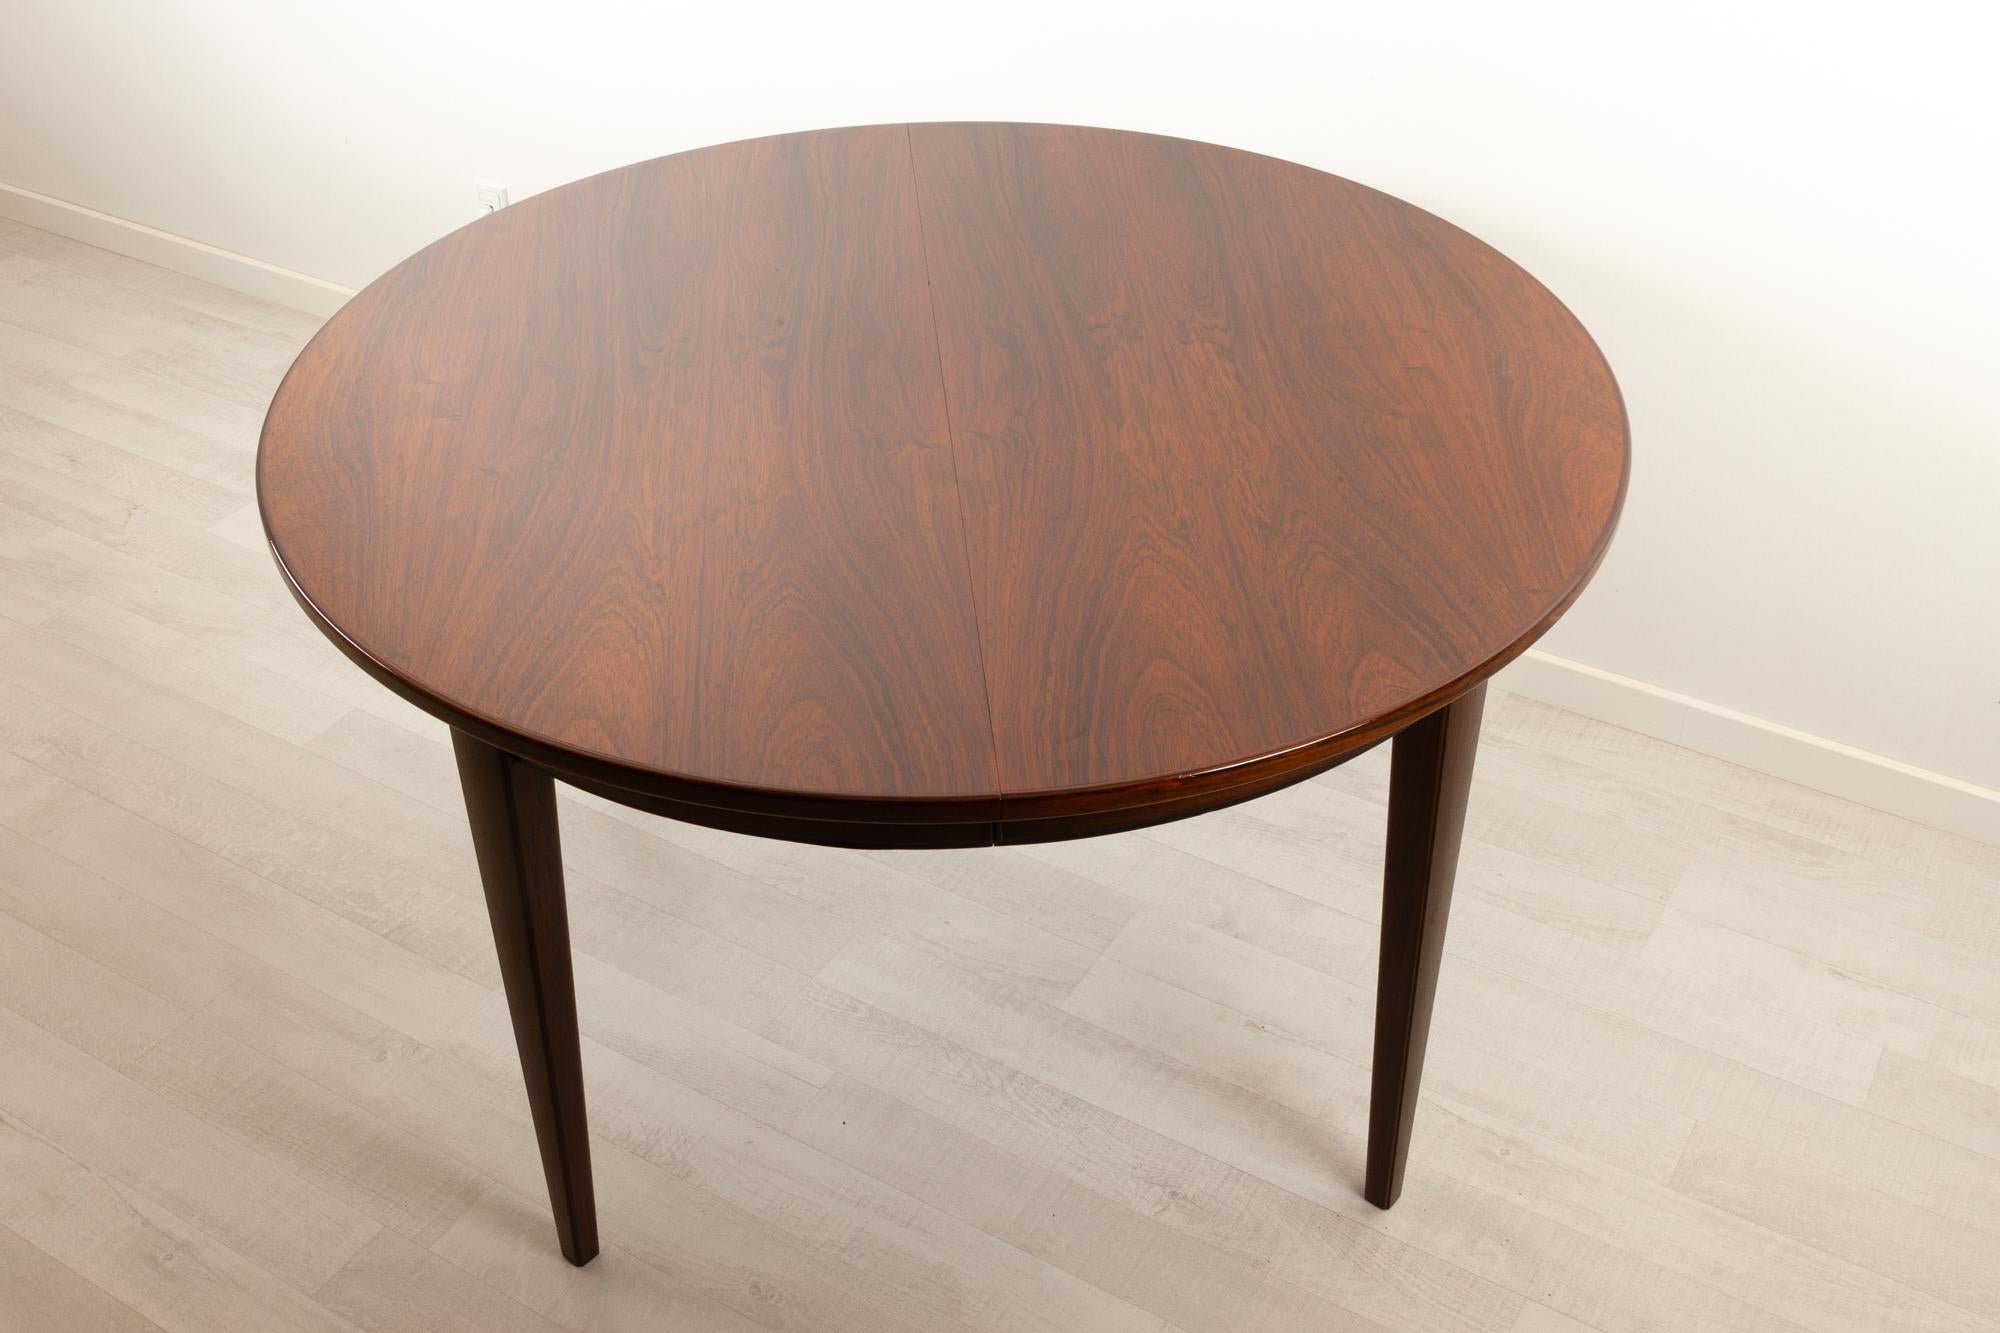 Vintage Danish round rosewood dining table model 55 by Gunni Omann for Omann Jun's Møbelfabrik, Denmark, 1960s.
Mid-Century Modern circular dining table. Beautiful rosewood veneer with expressive grain. Tapered legs. The table is extendable with